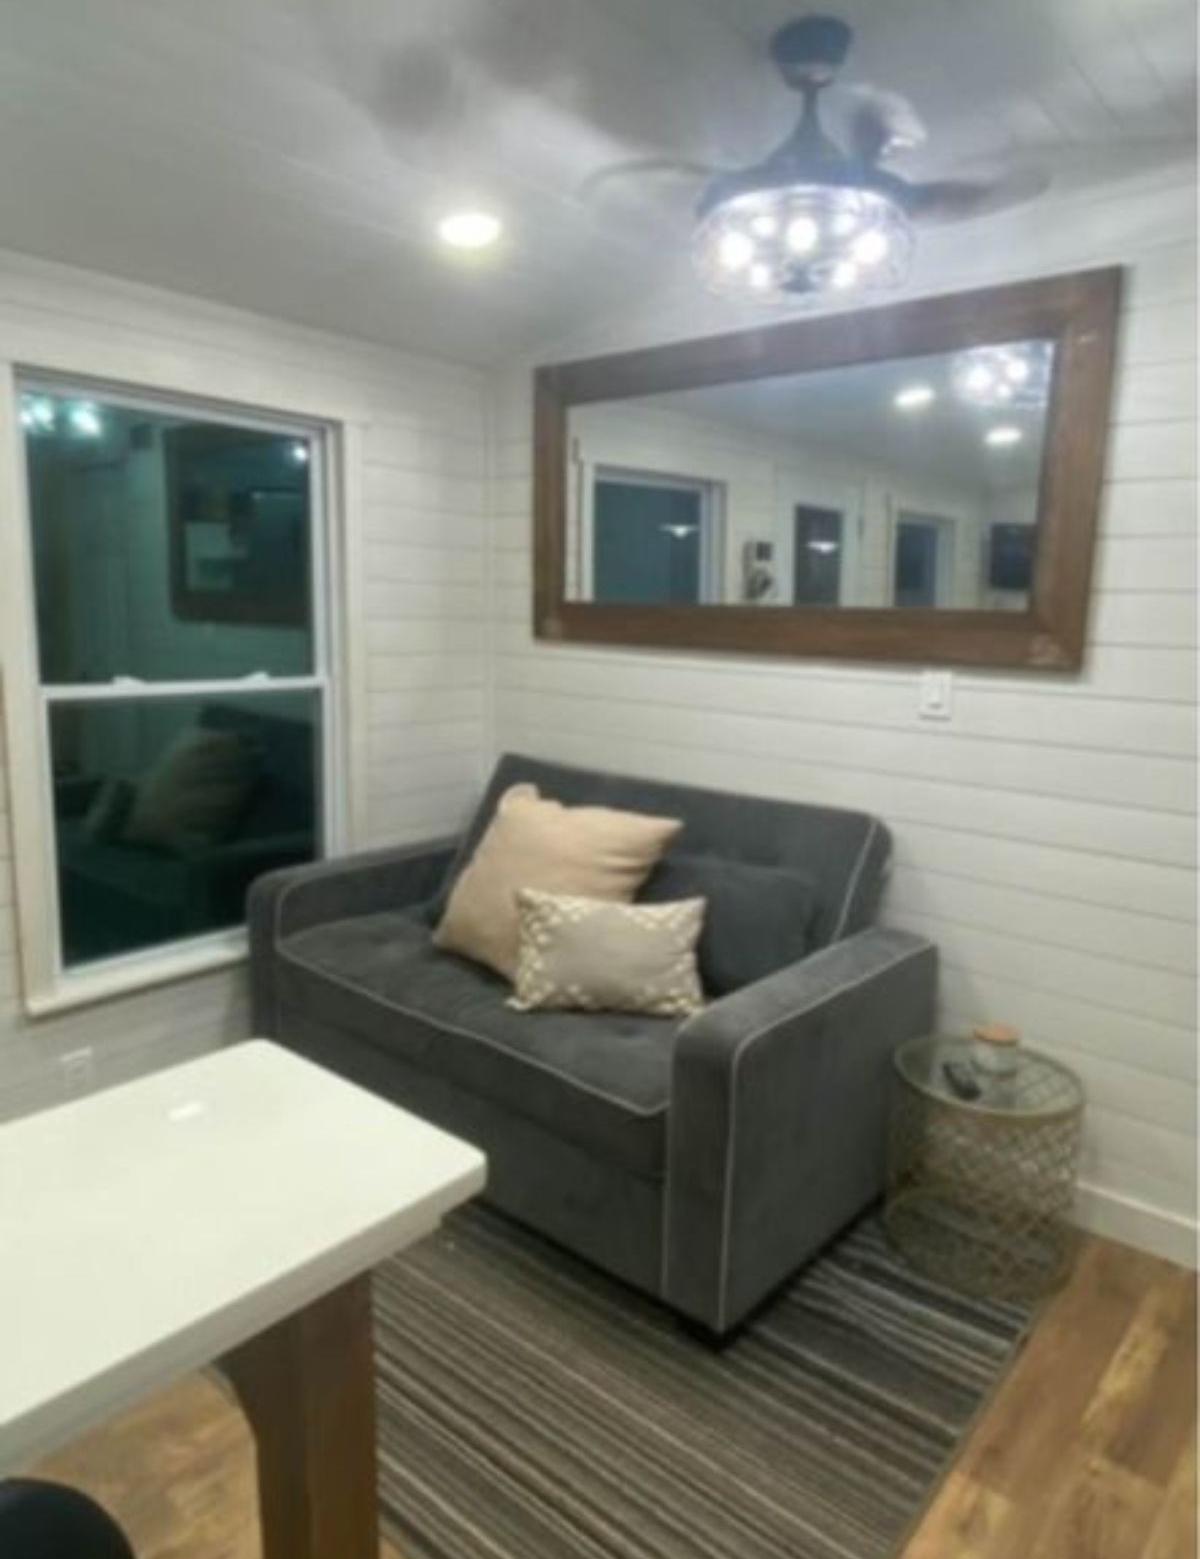 Living room of Tiny Modular Home With 2 Bedrooms has comfortable couch.